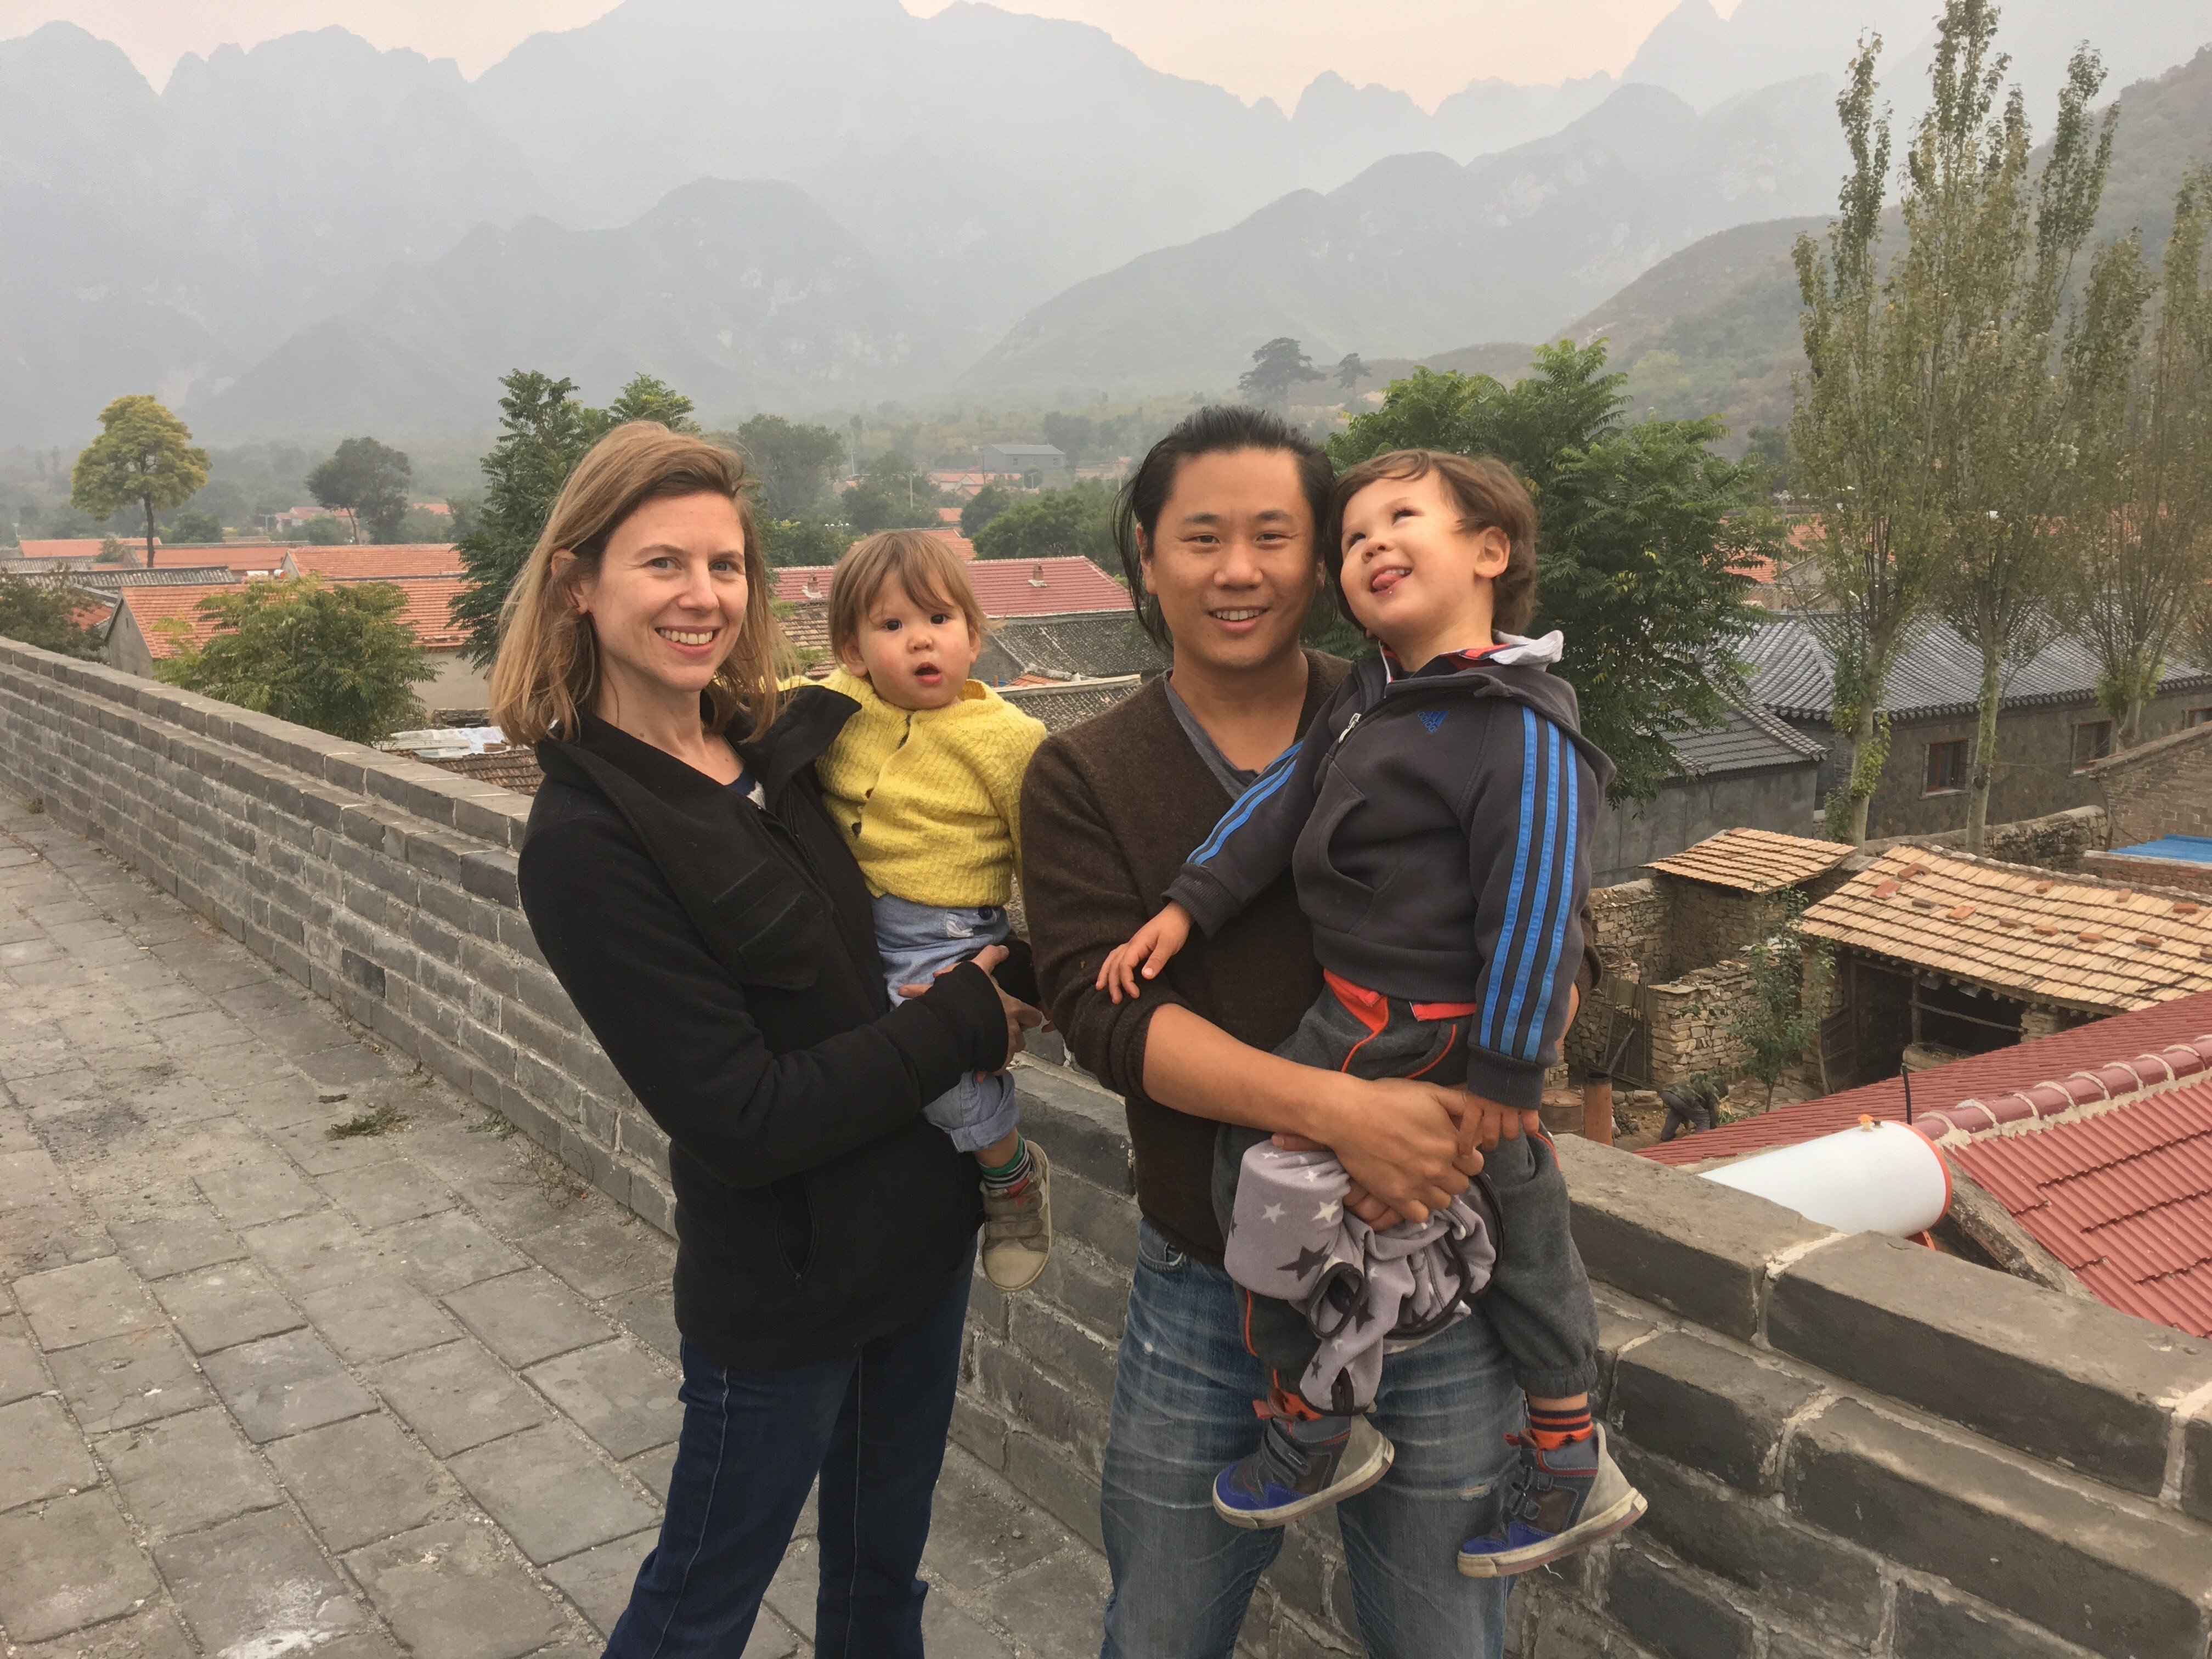 Huihan Lie with his wife and children. Photo: Handout